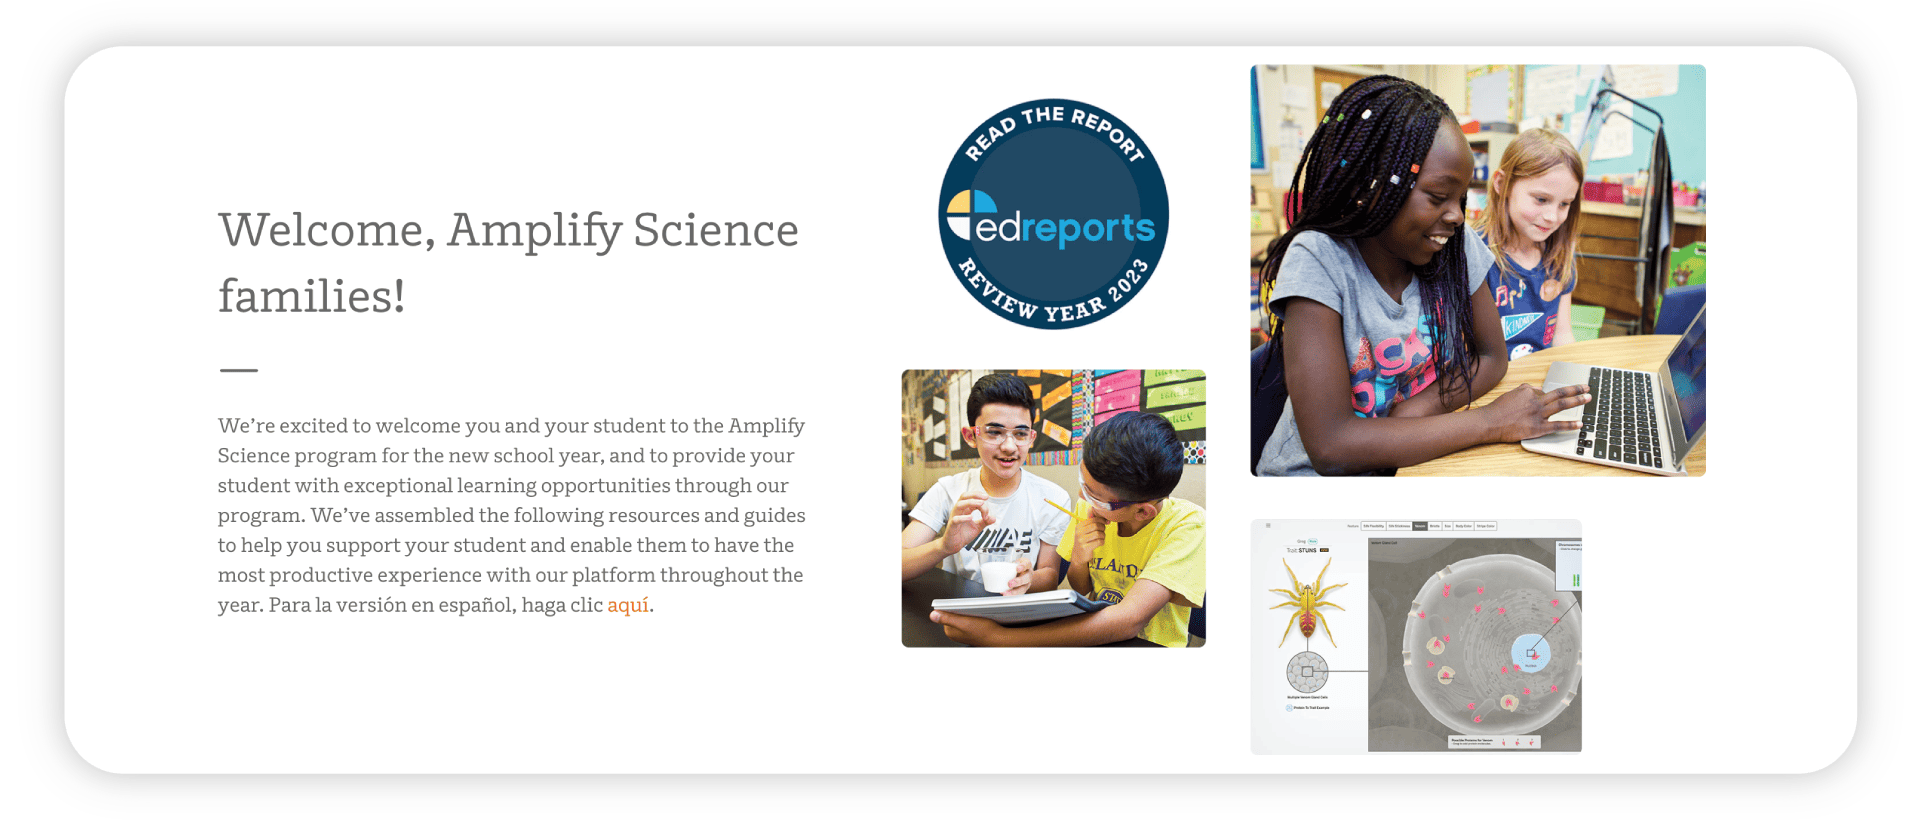 Webpage banner featuring text 'Welcome, Amplify Science families!' and two images: one of a teacher with two K—5 students looking at a book, and another of a student using a laptop